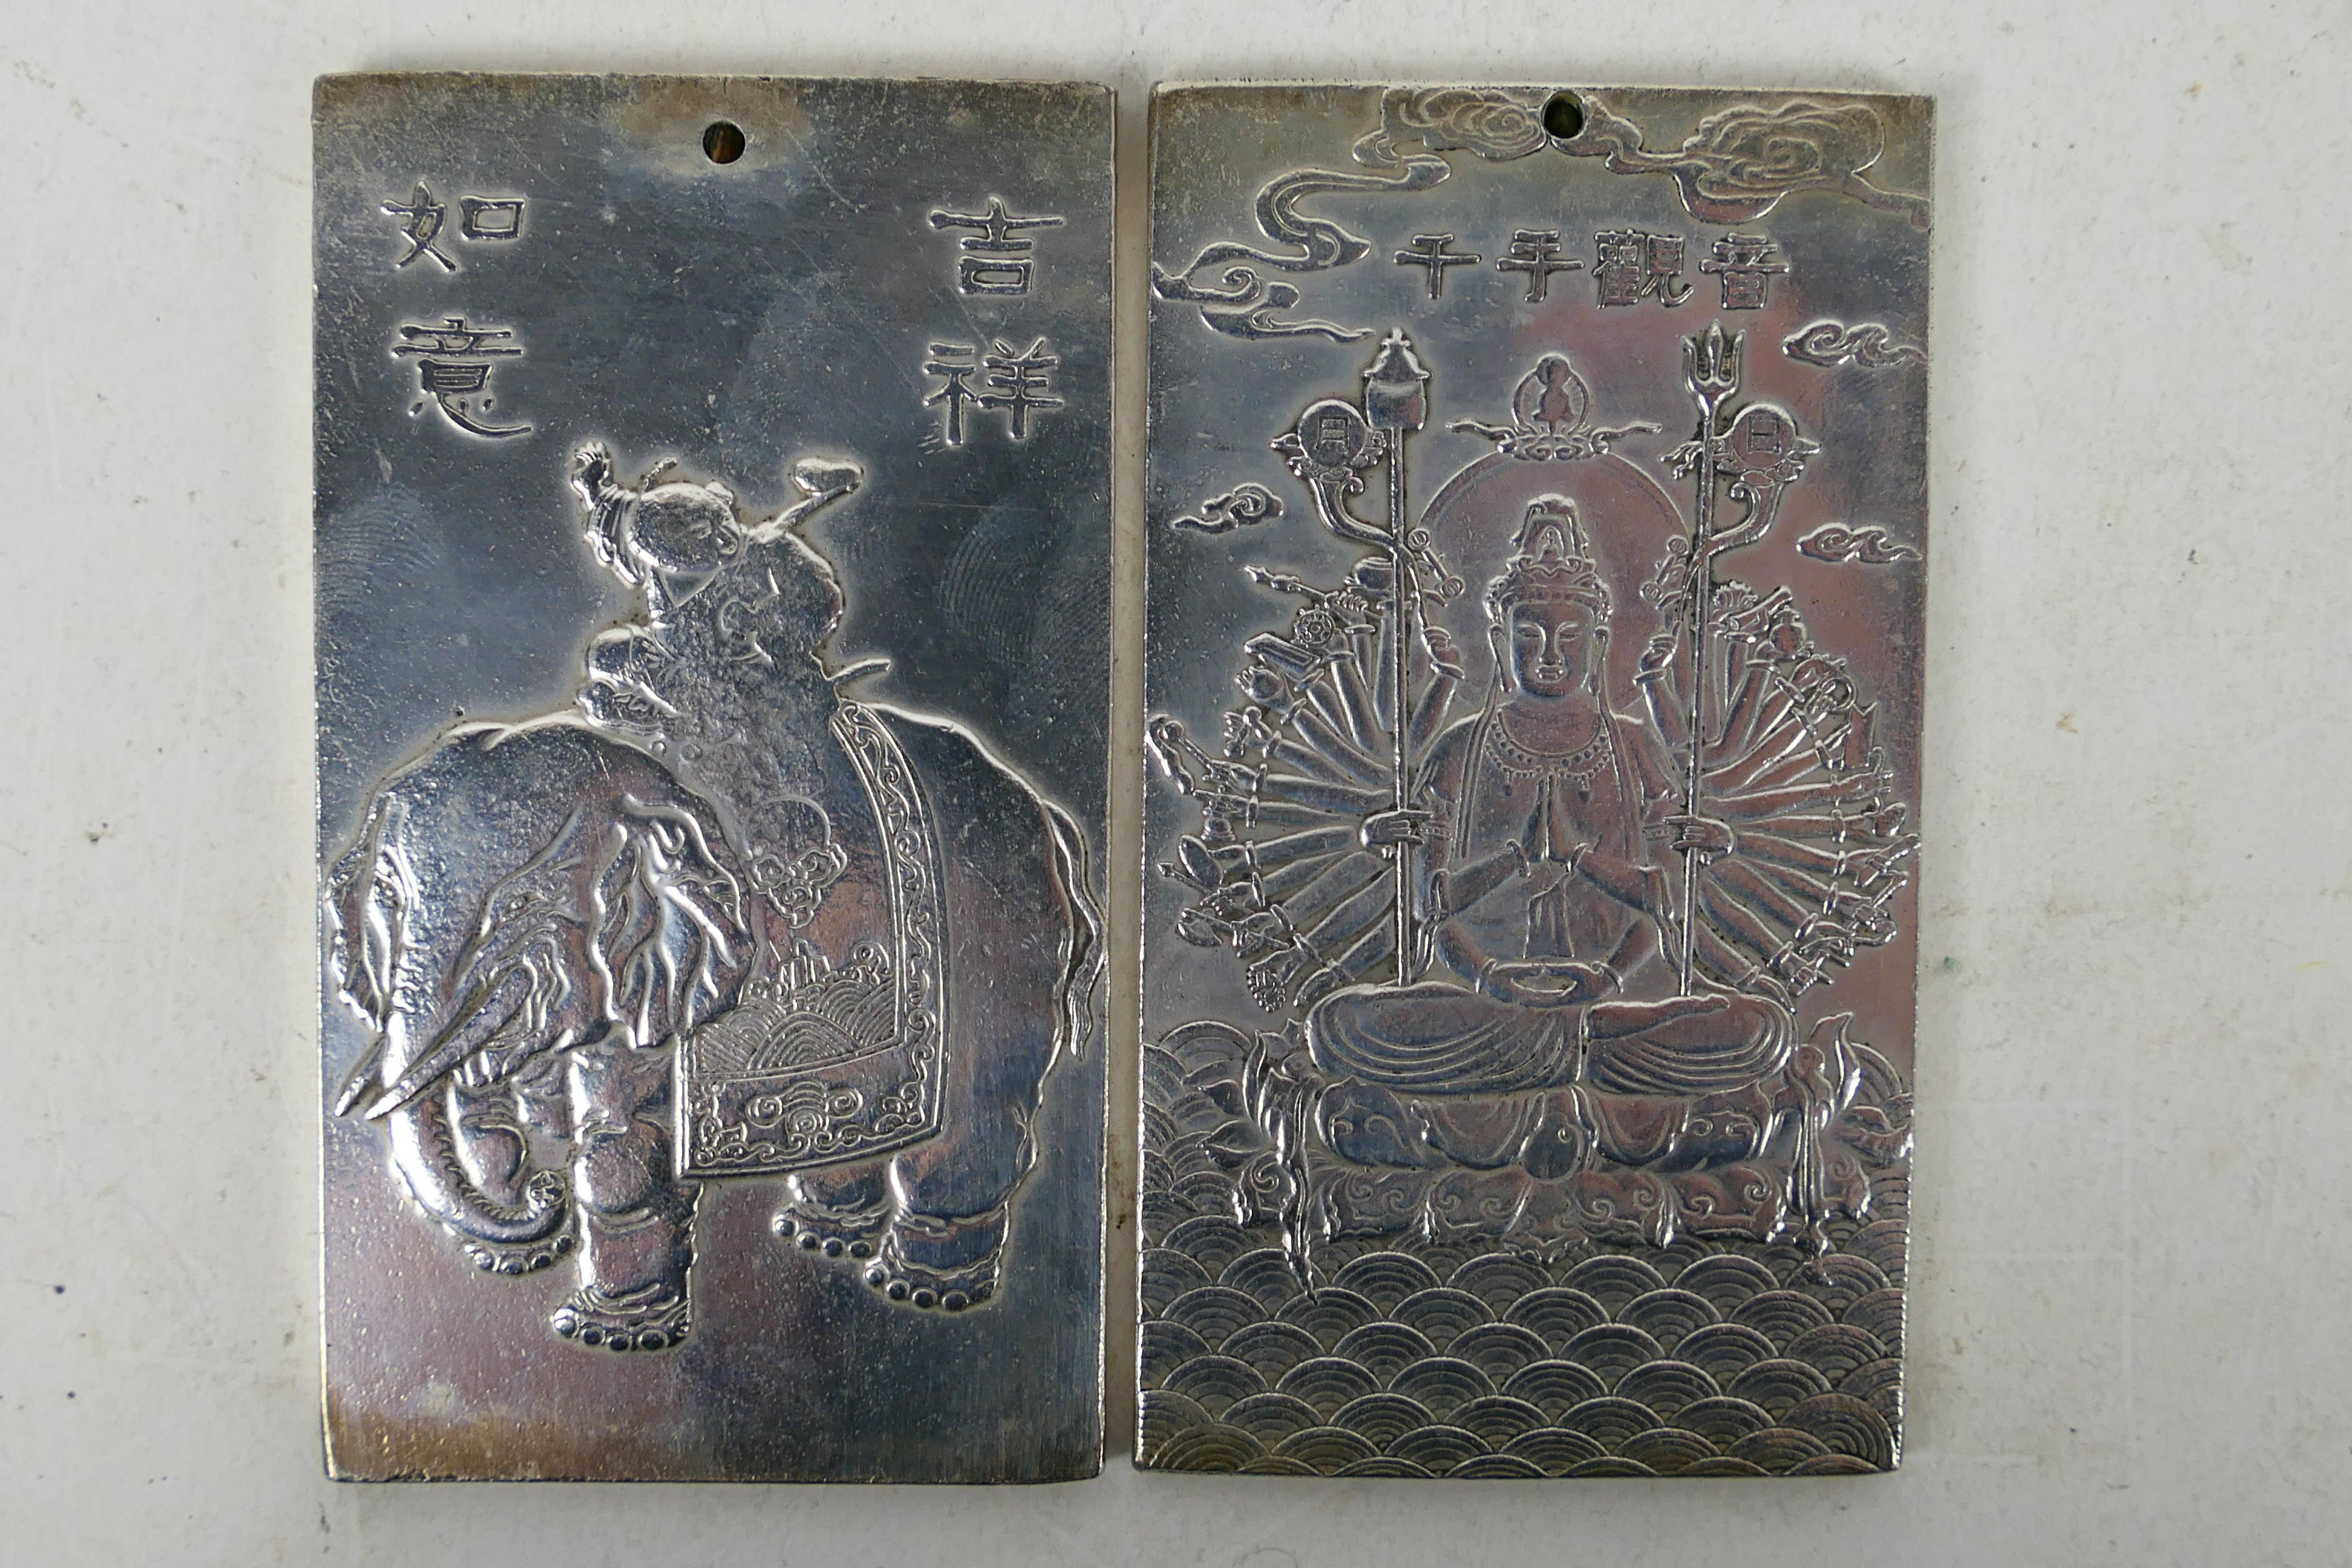 Two Chinese white metal trade tokens / plaques with zodiac decoration to one side,